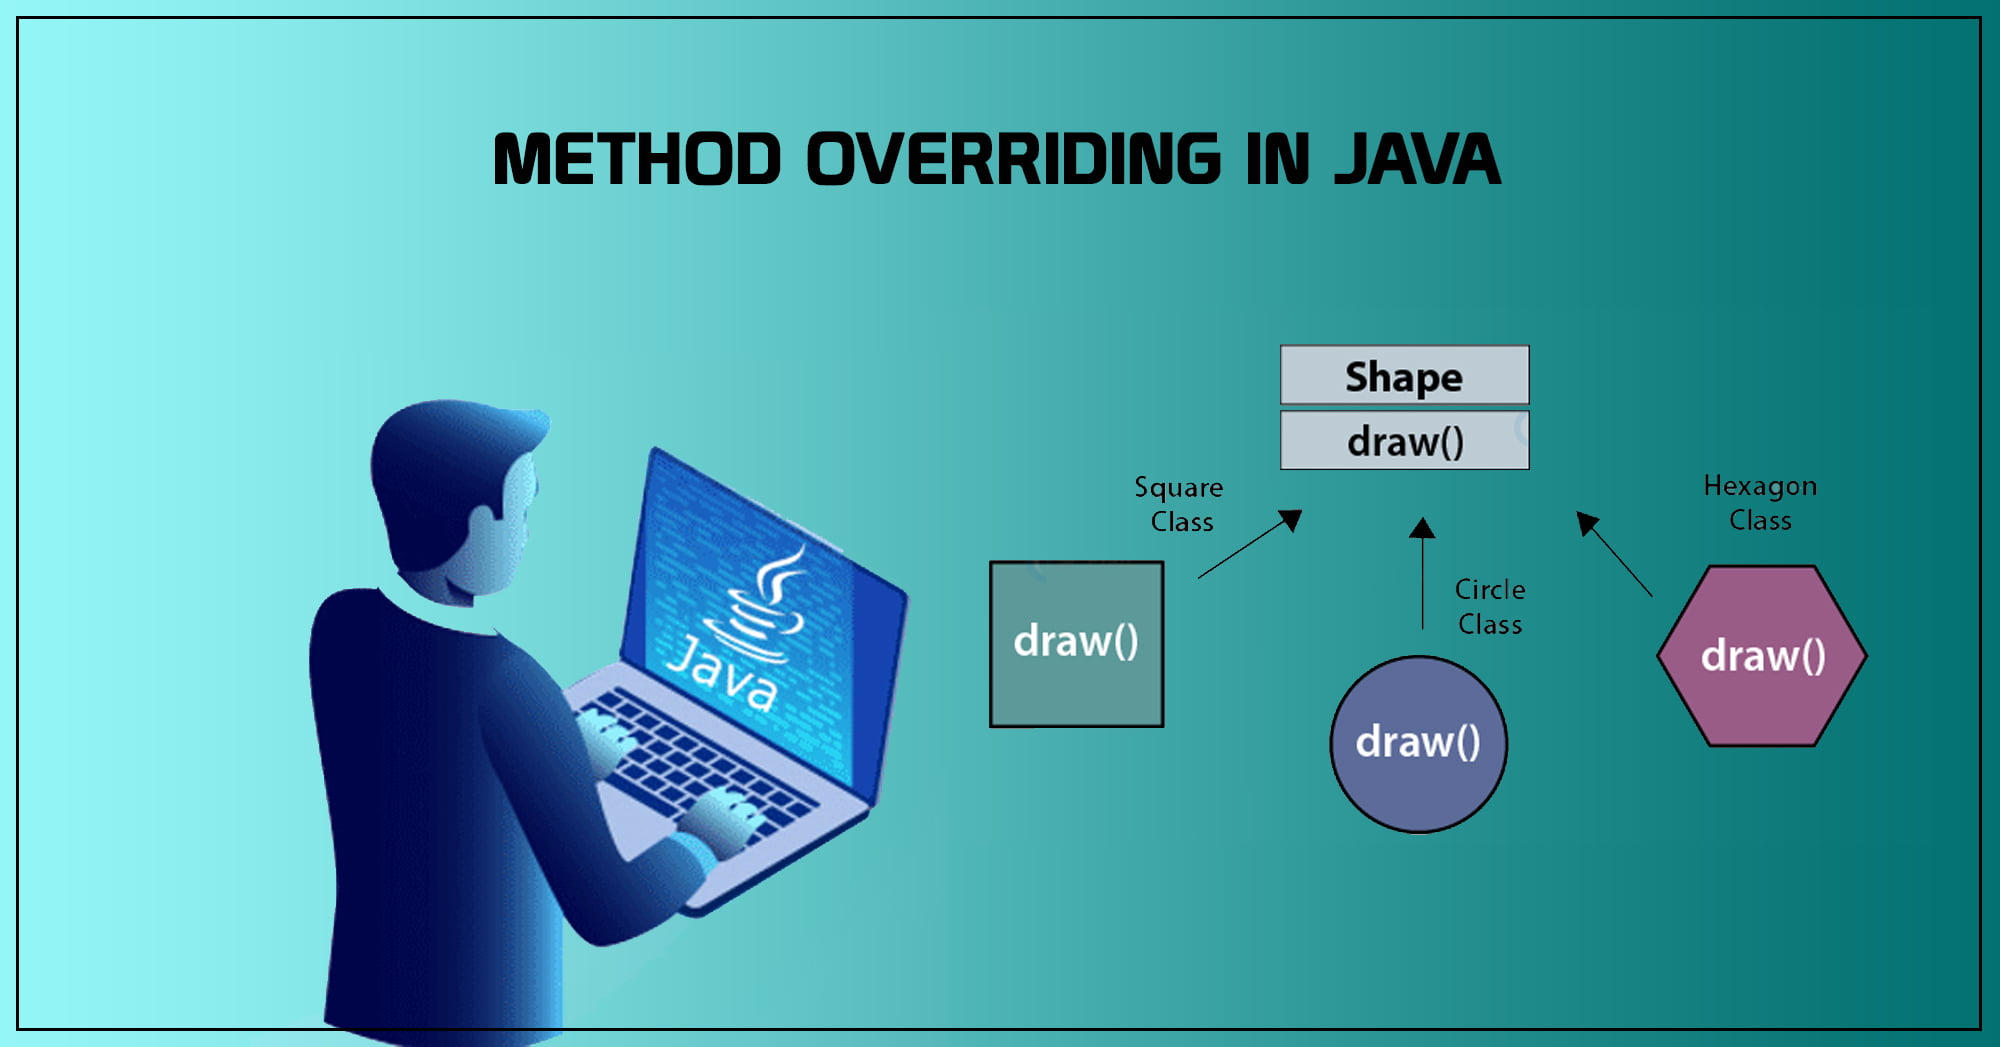 Method Overloading vs Method Overriding in Java – What's the Difference?